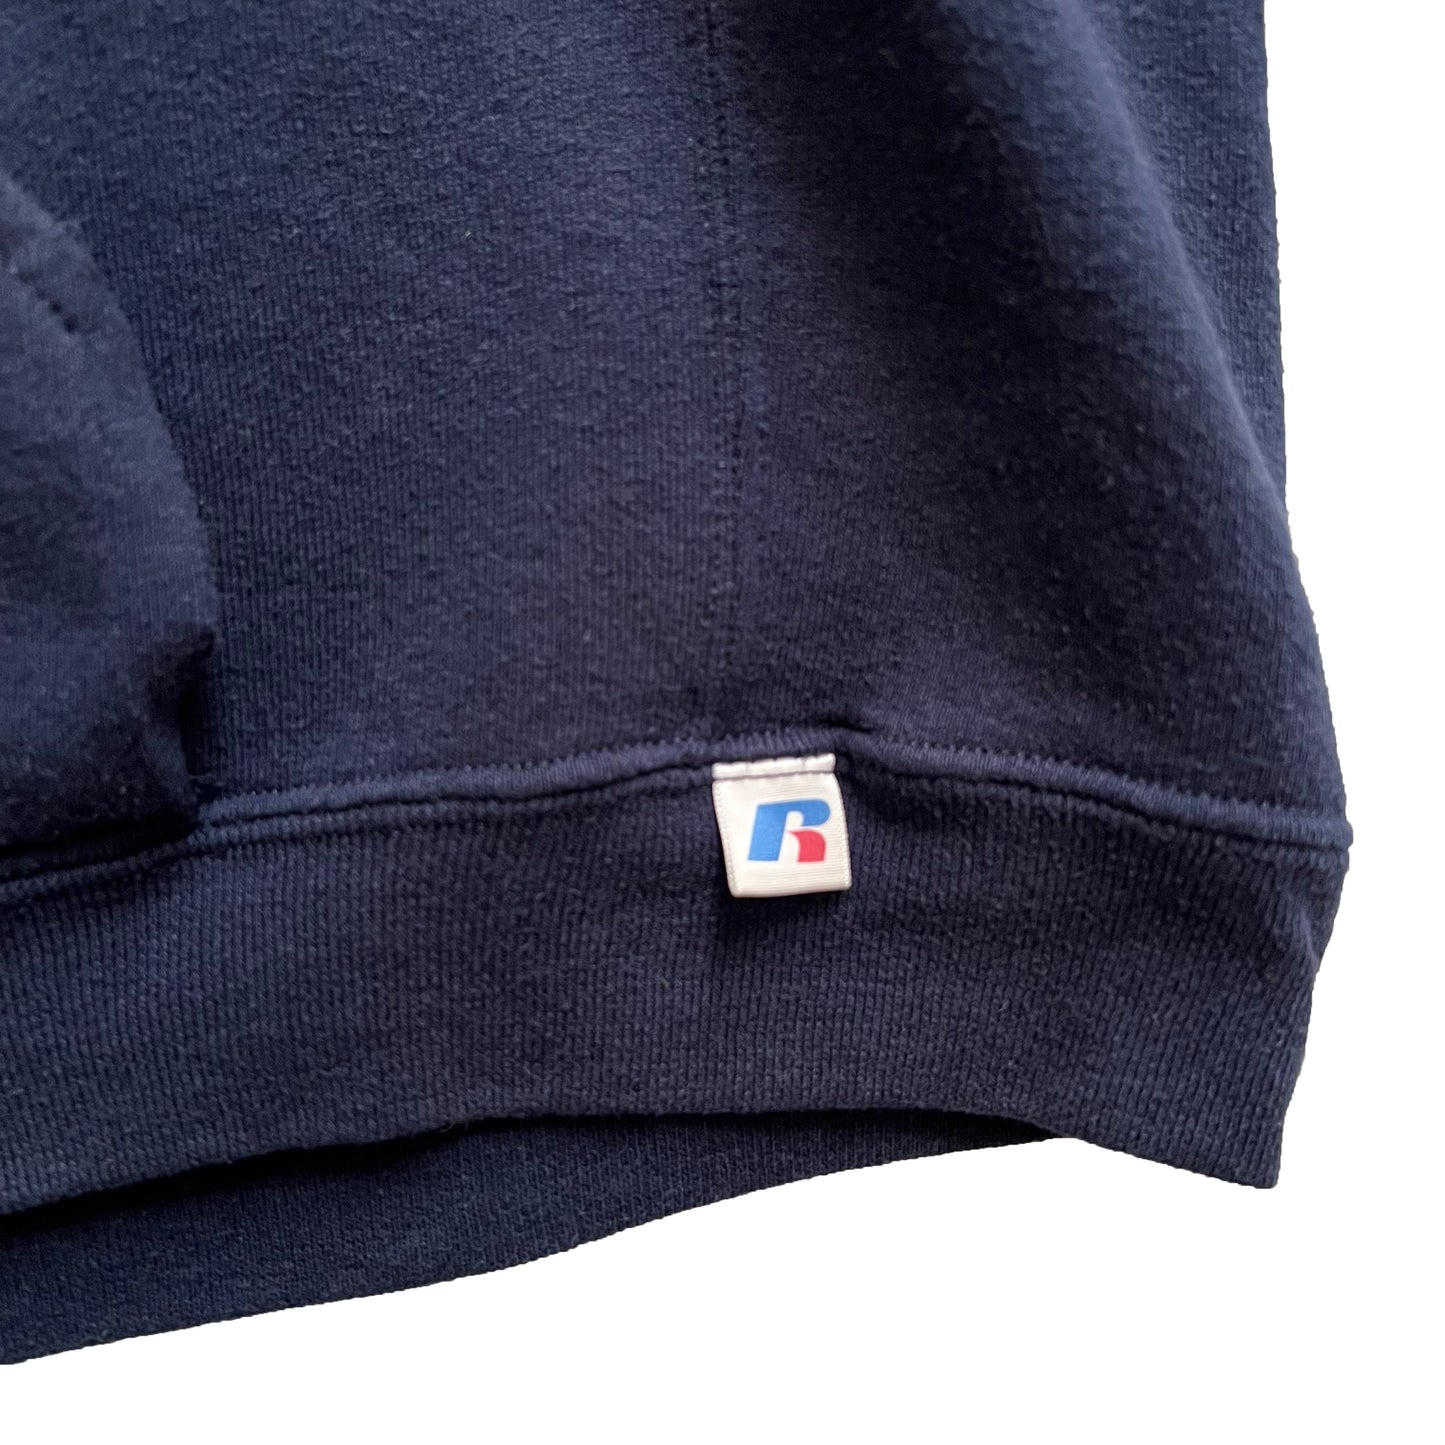 00’s RUSSELL ATHLETIC "NAPS FOOTBALL" OVERSIZED HOODIE